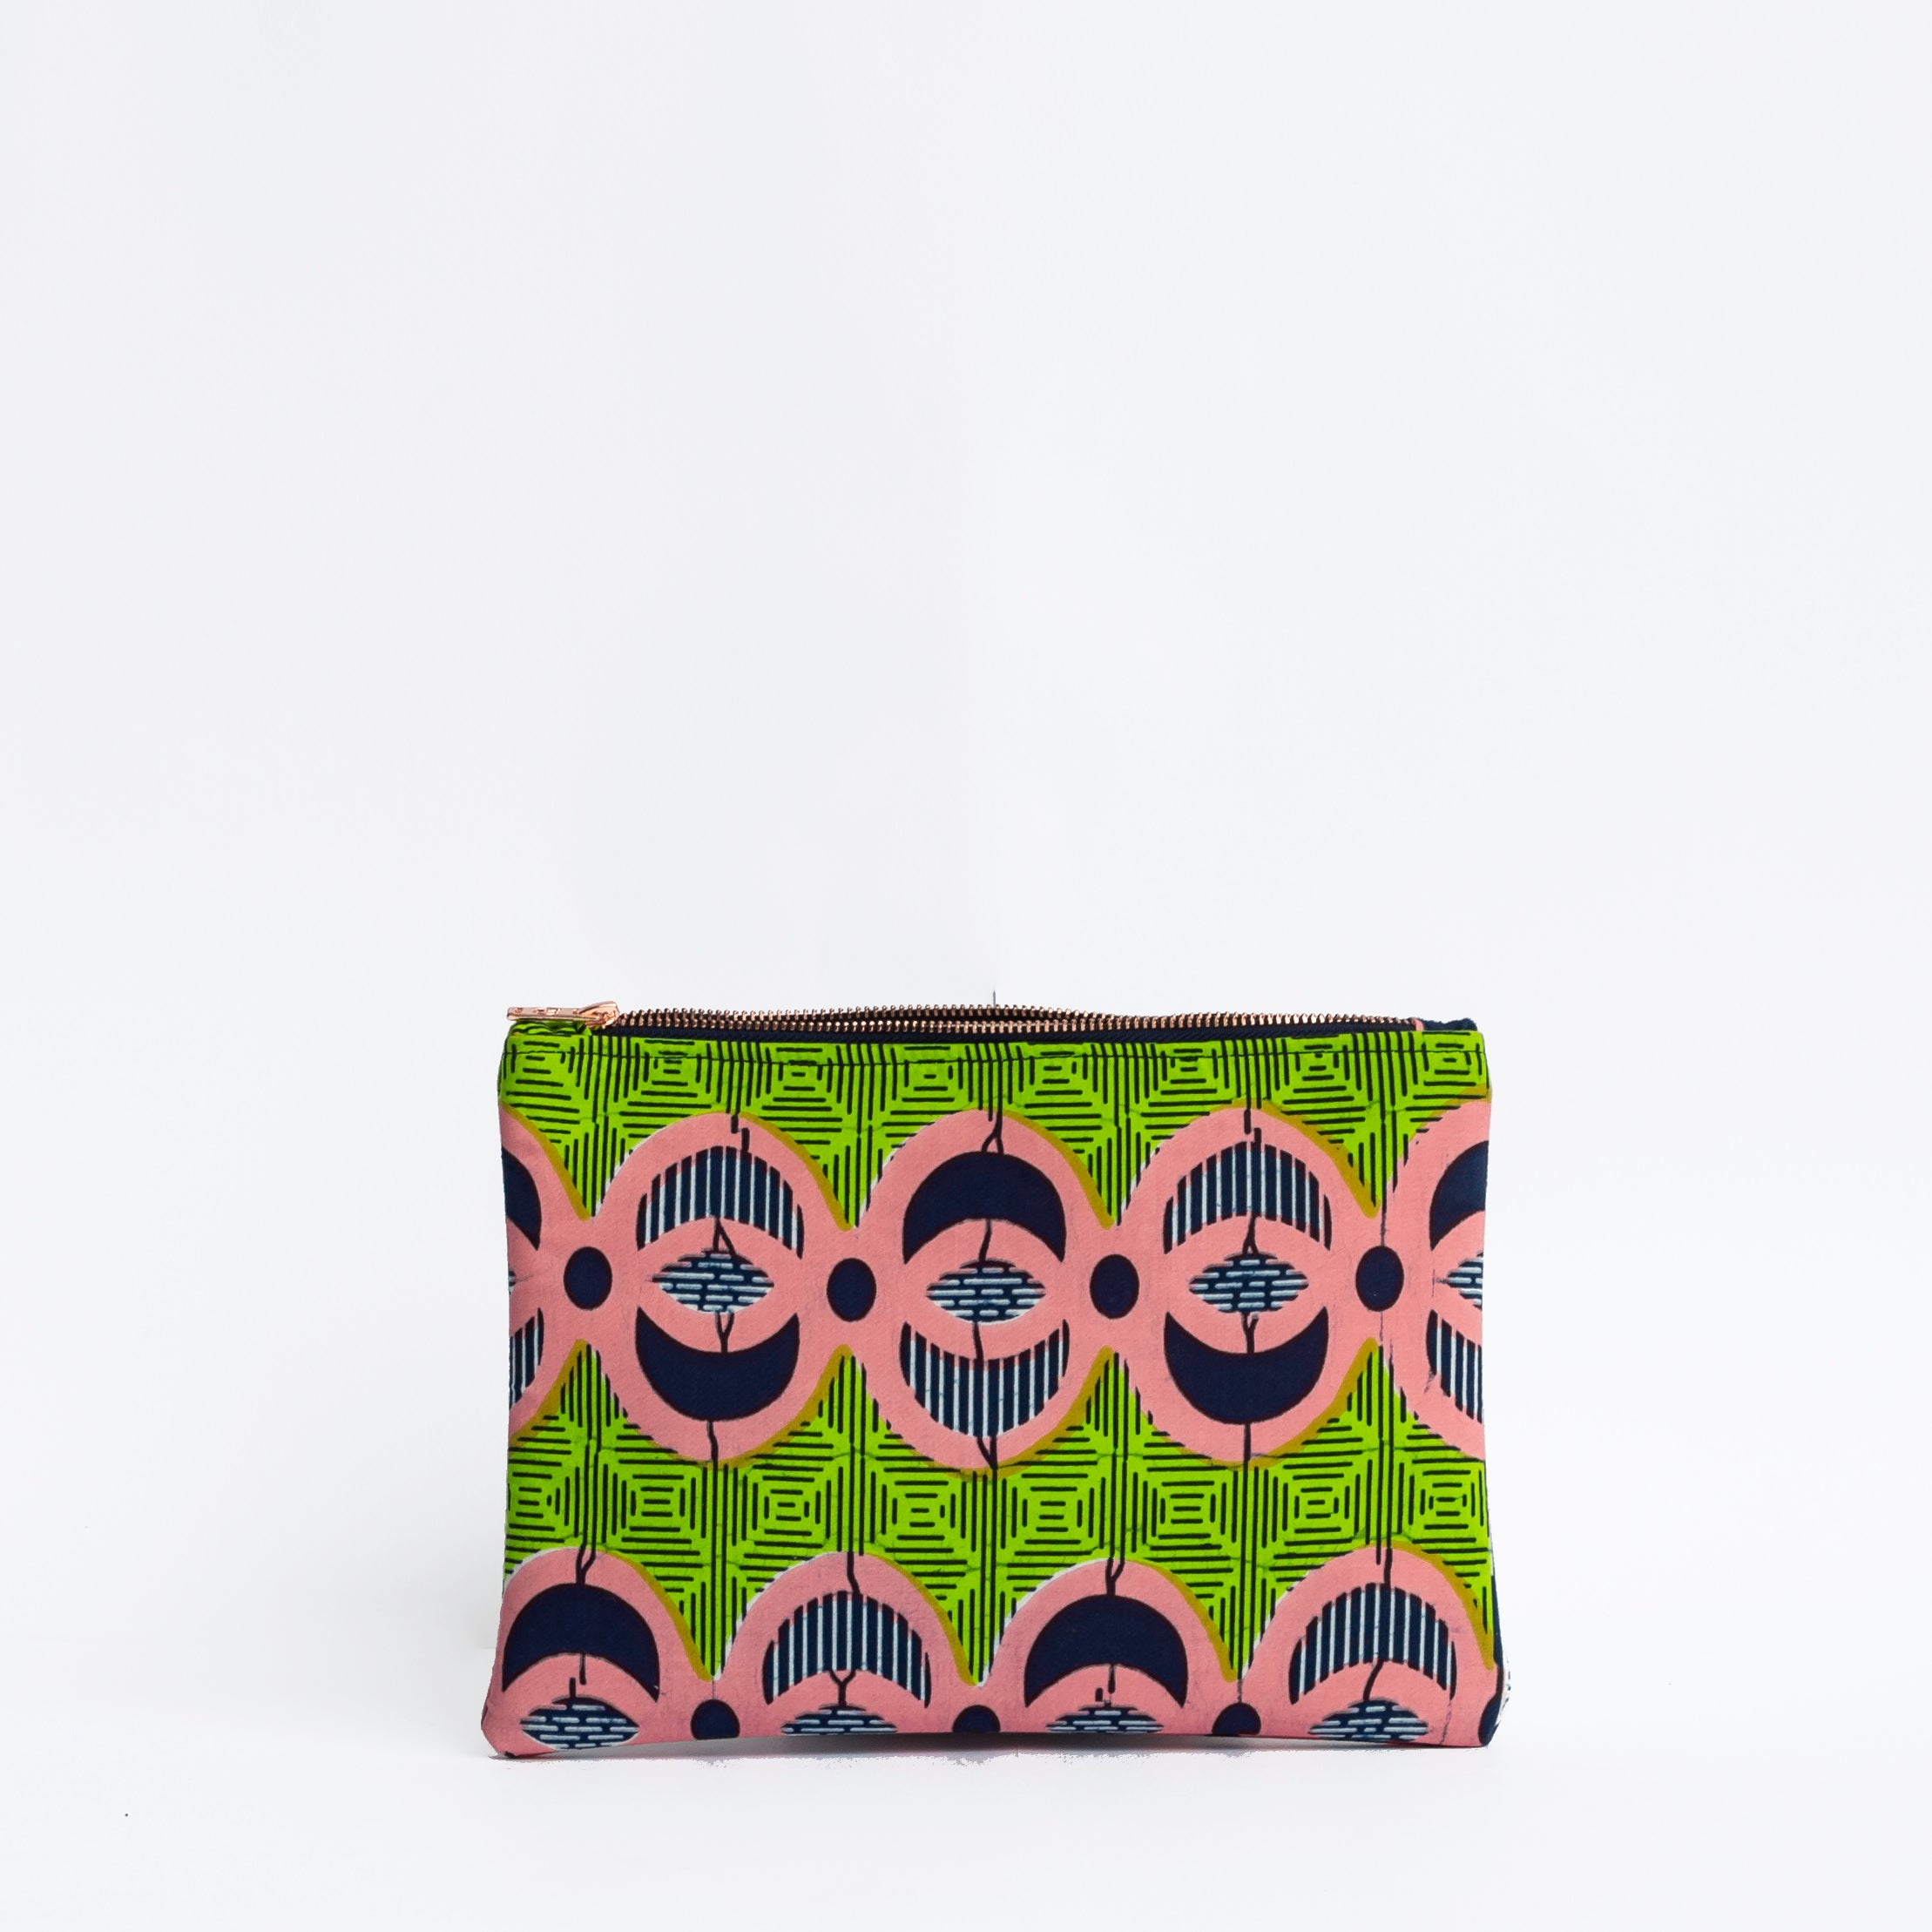 Bold green, pink and navy Zipper Clutch bag by GEOMETRIC. 